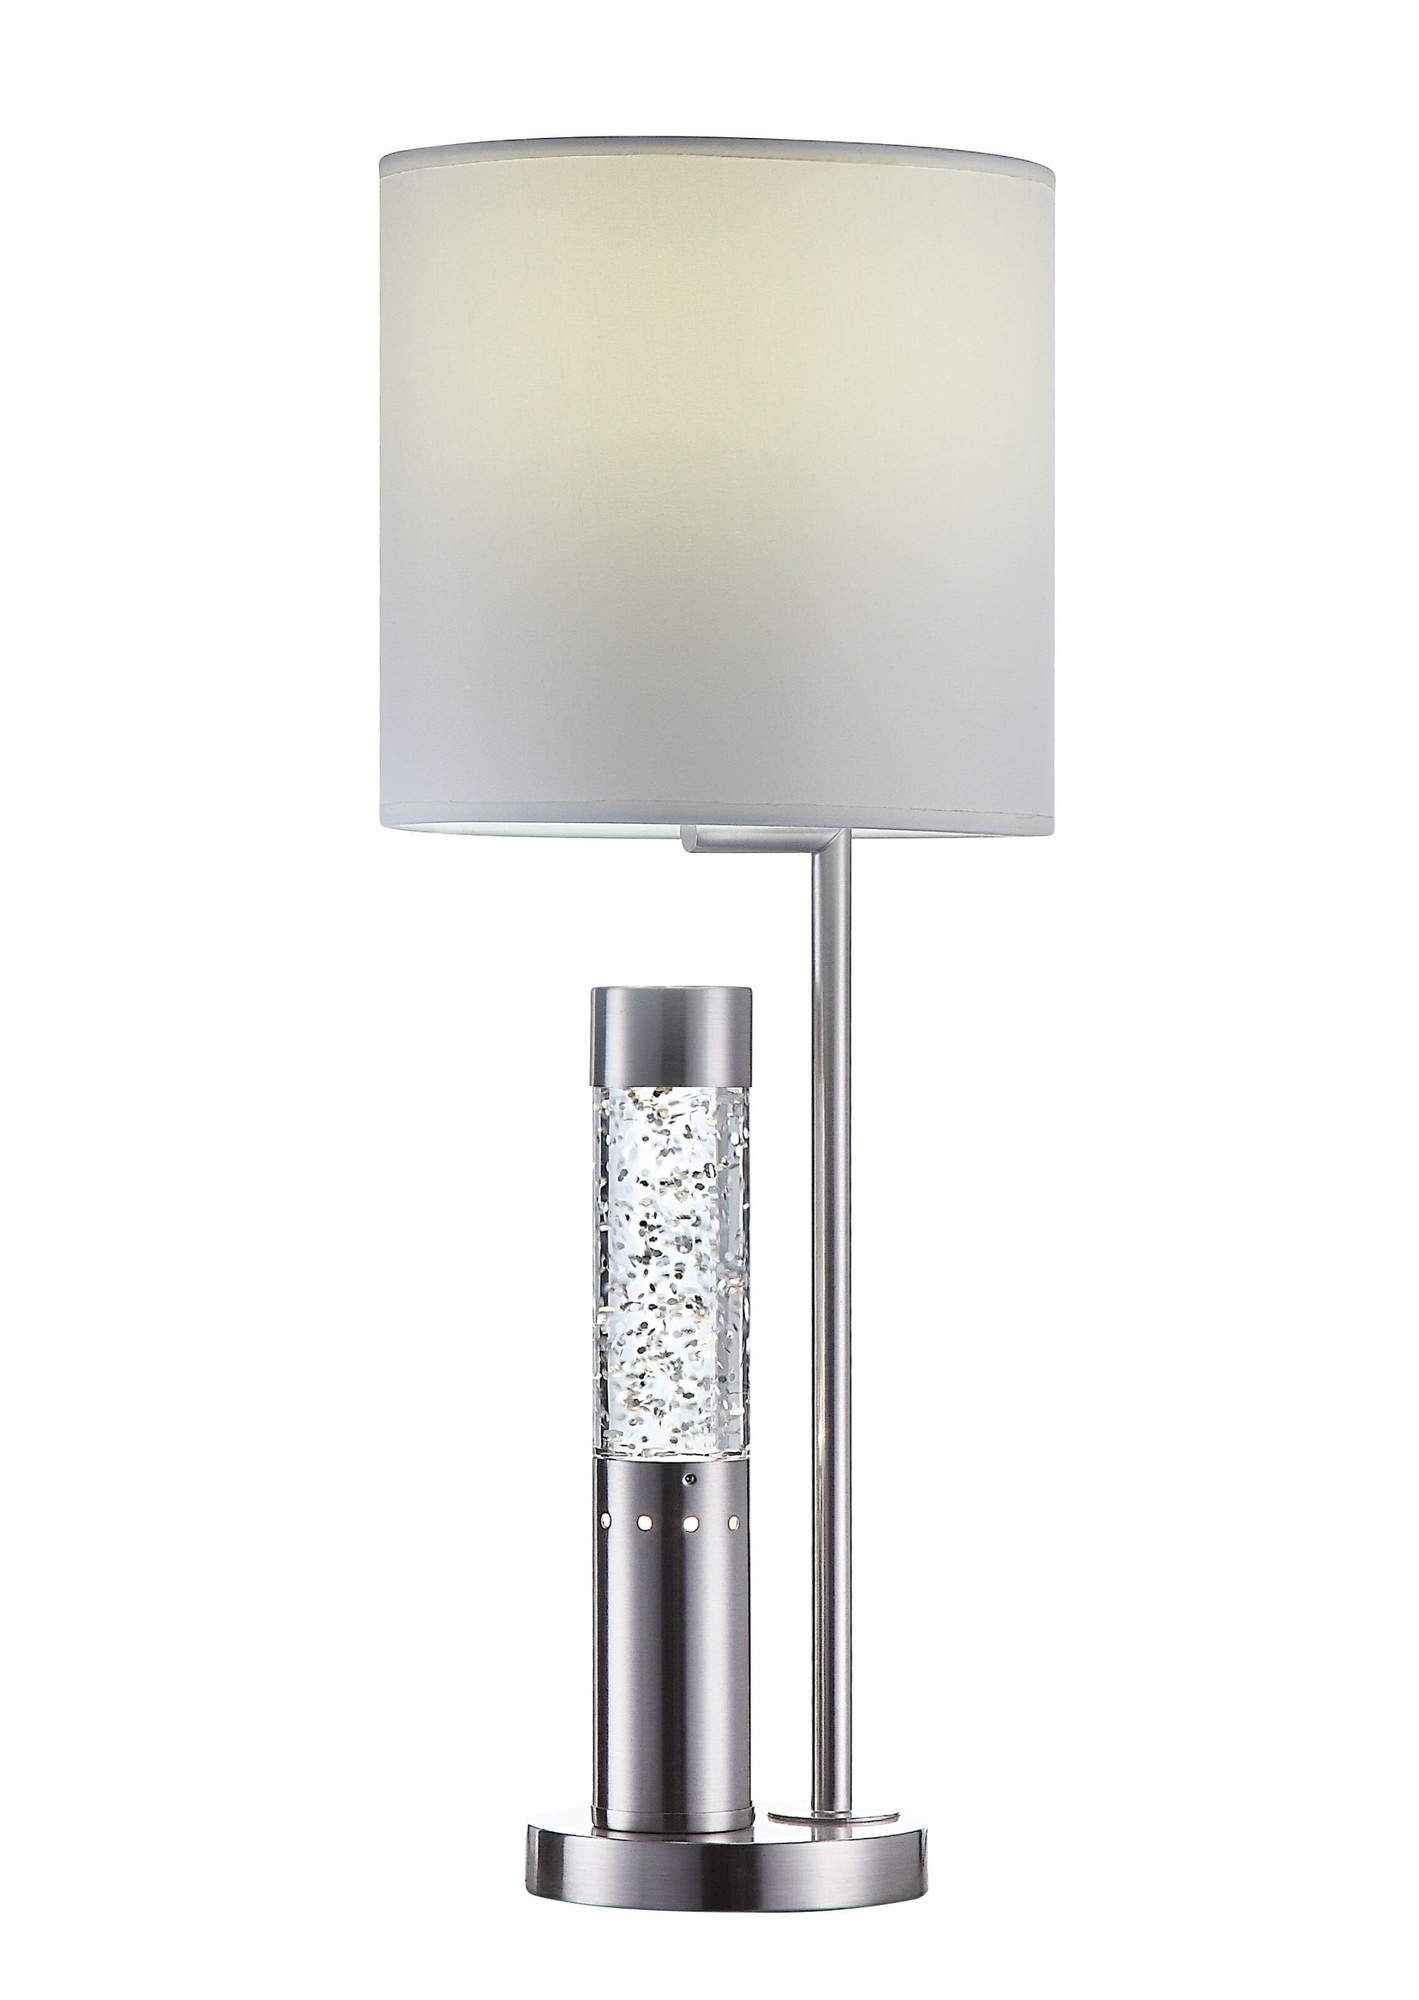 10" X 10" X 25" Brushed Nickel Metal Glass LED Shade Table Lamp